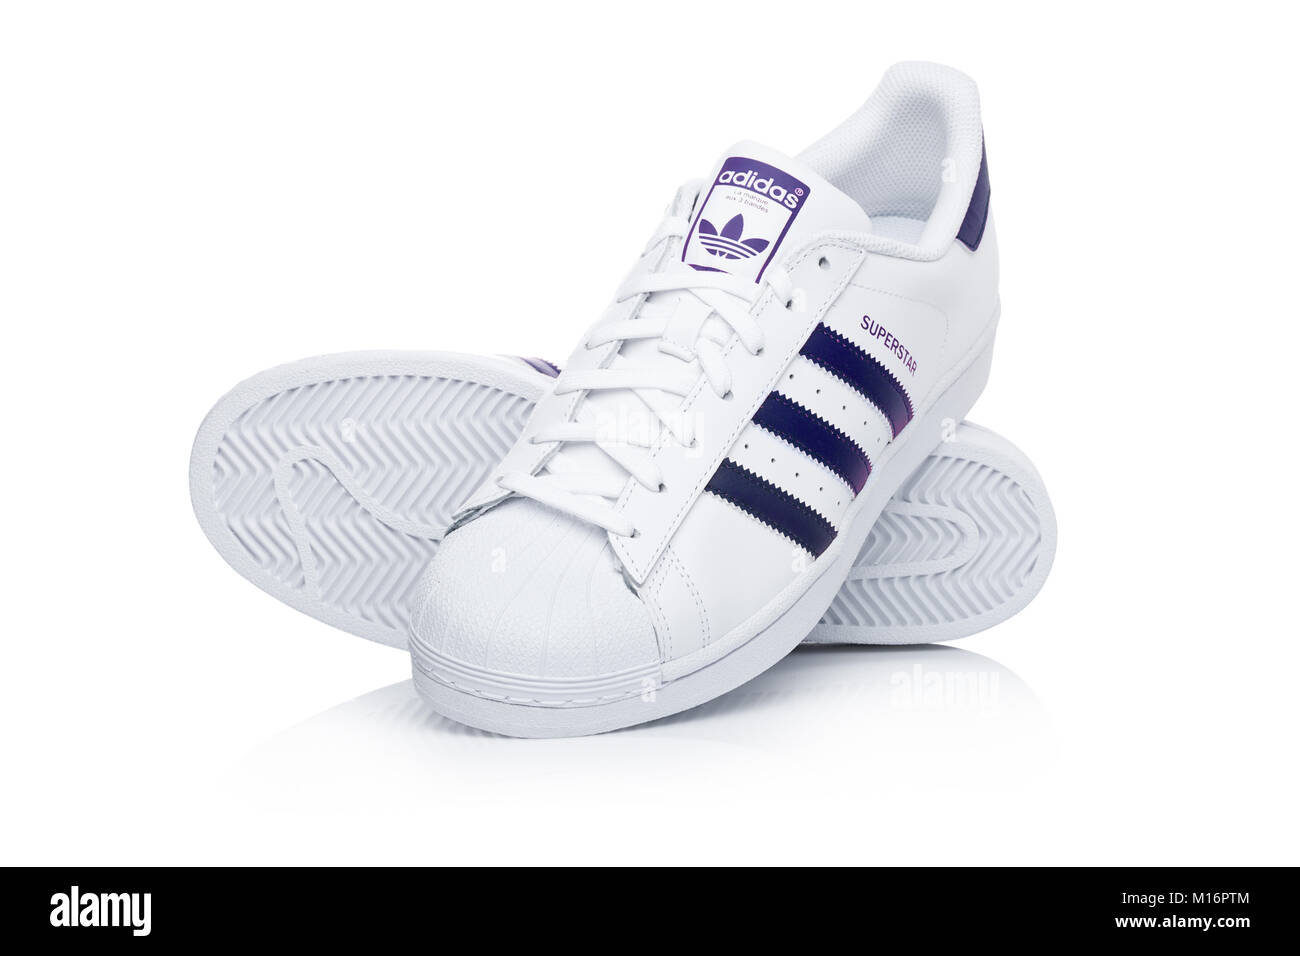 Adidas shoe track High Resolution Stock Photography and Images - Alamy